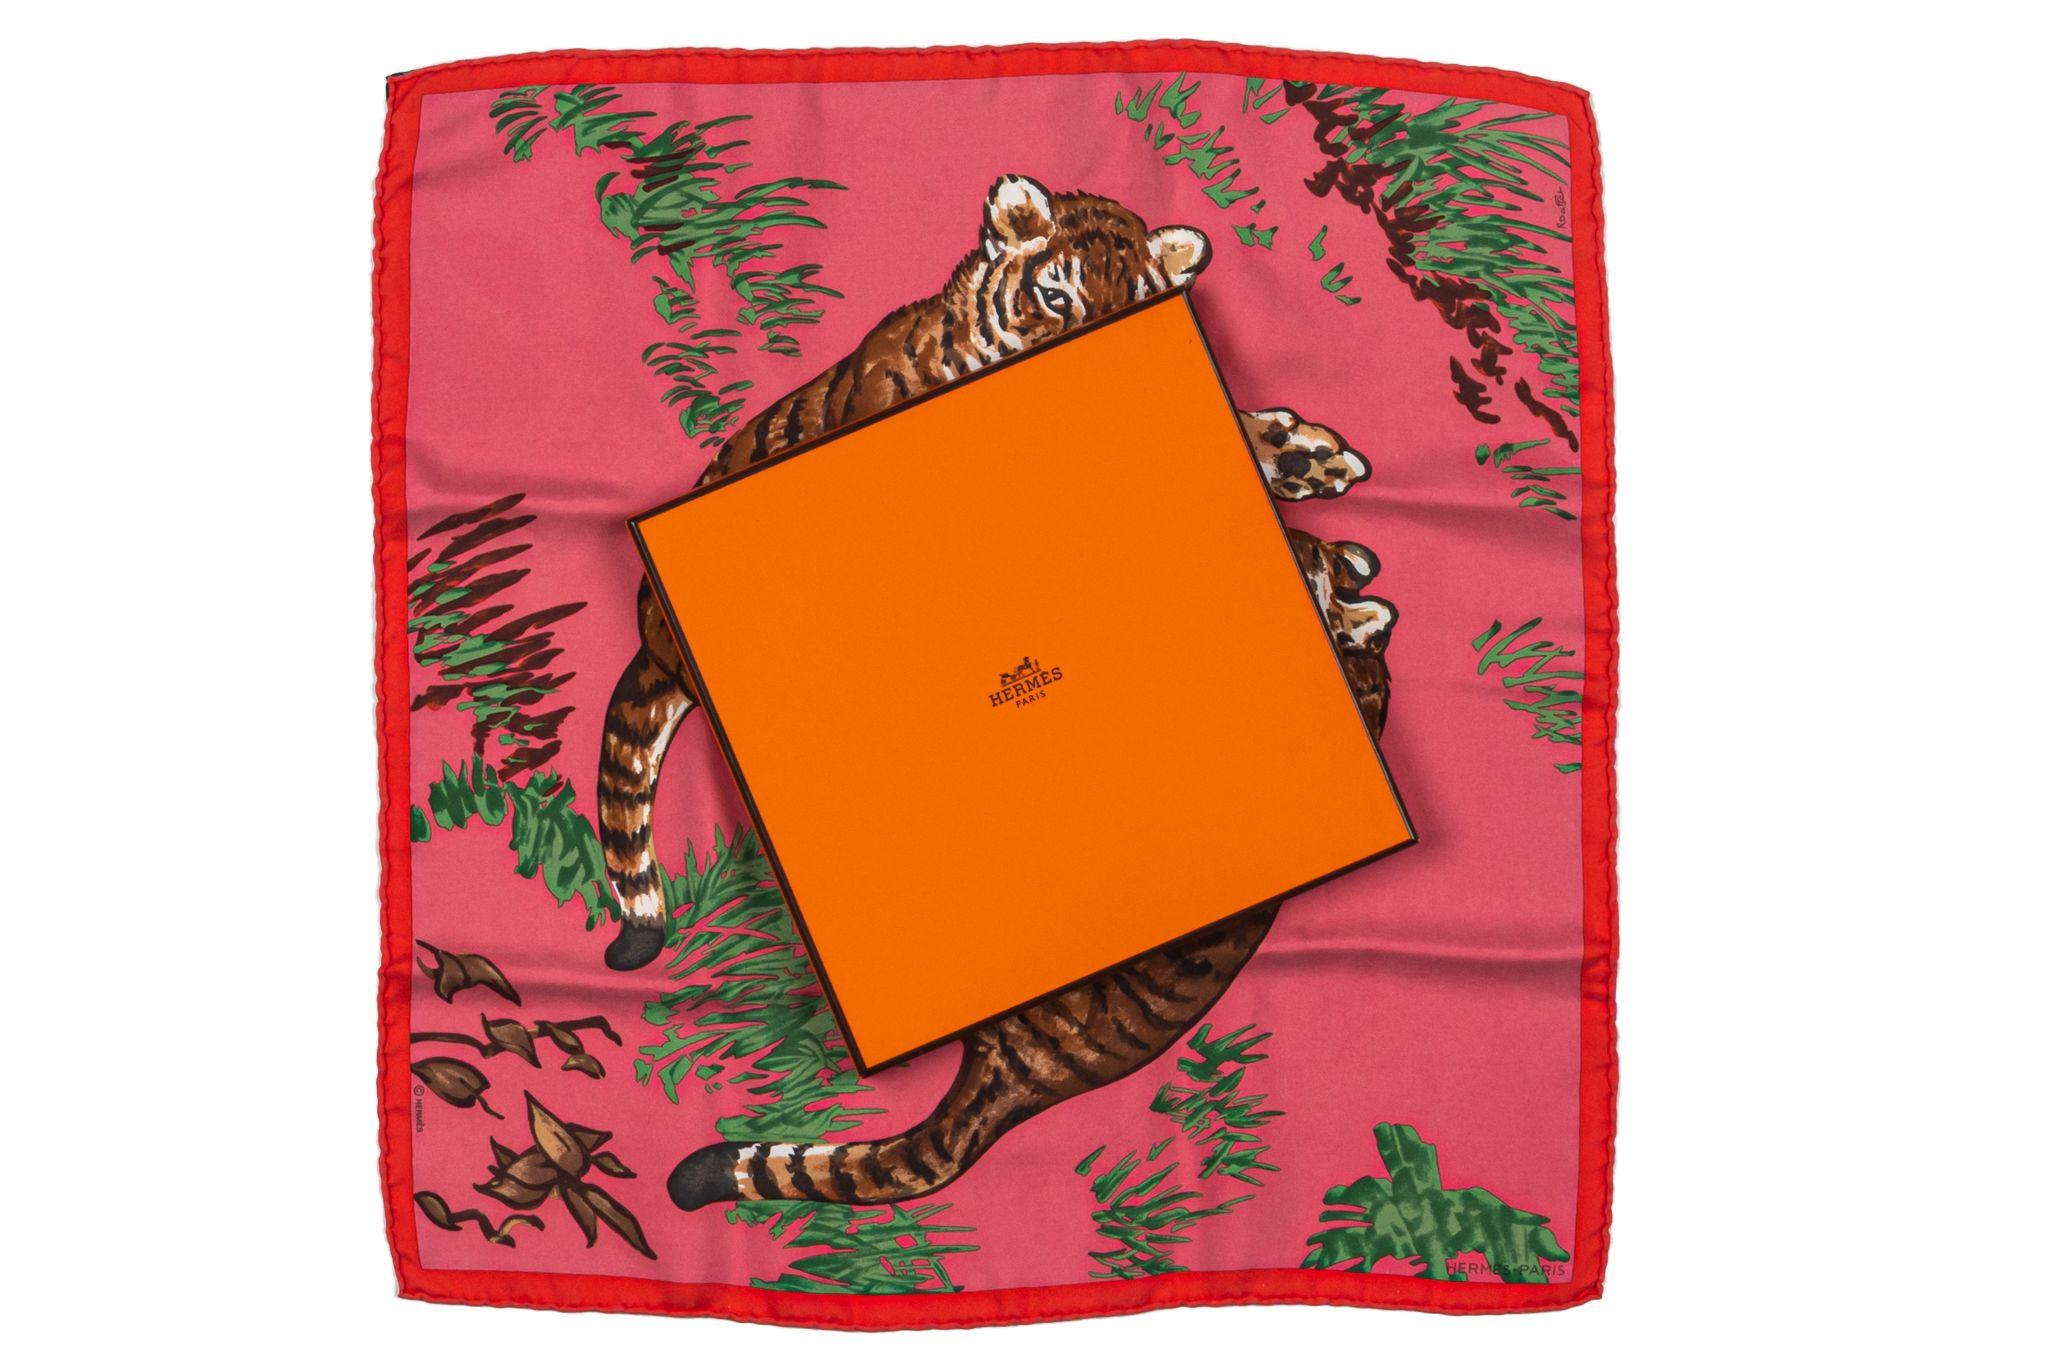 Hermès Tigers Silk Scarf in excellent condition. Pink background with red border featuring large bounding tigers. Rolled edges. Comes with original box.